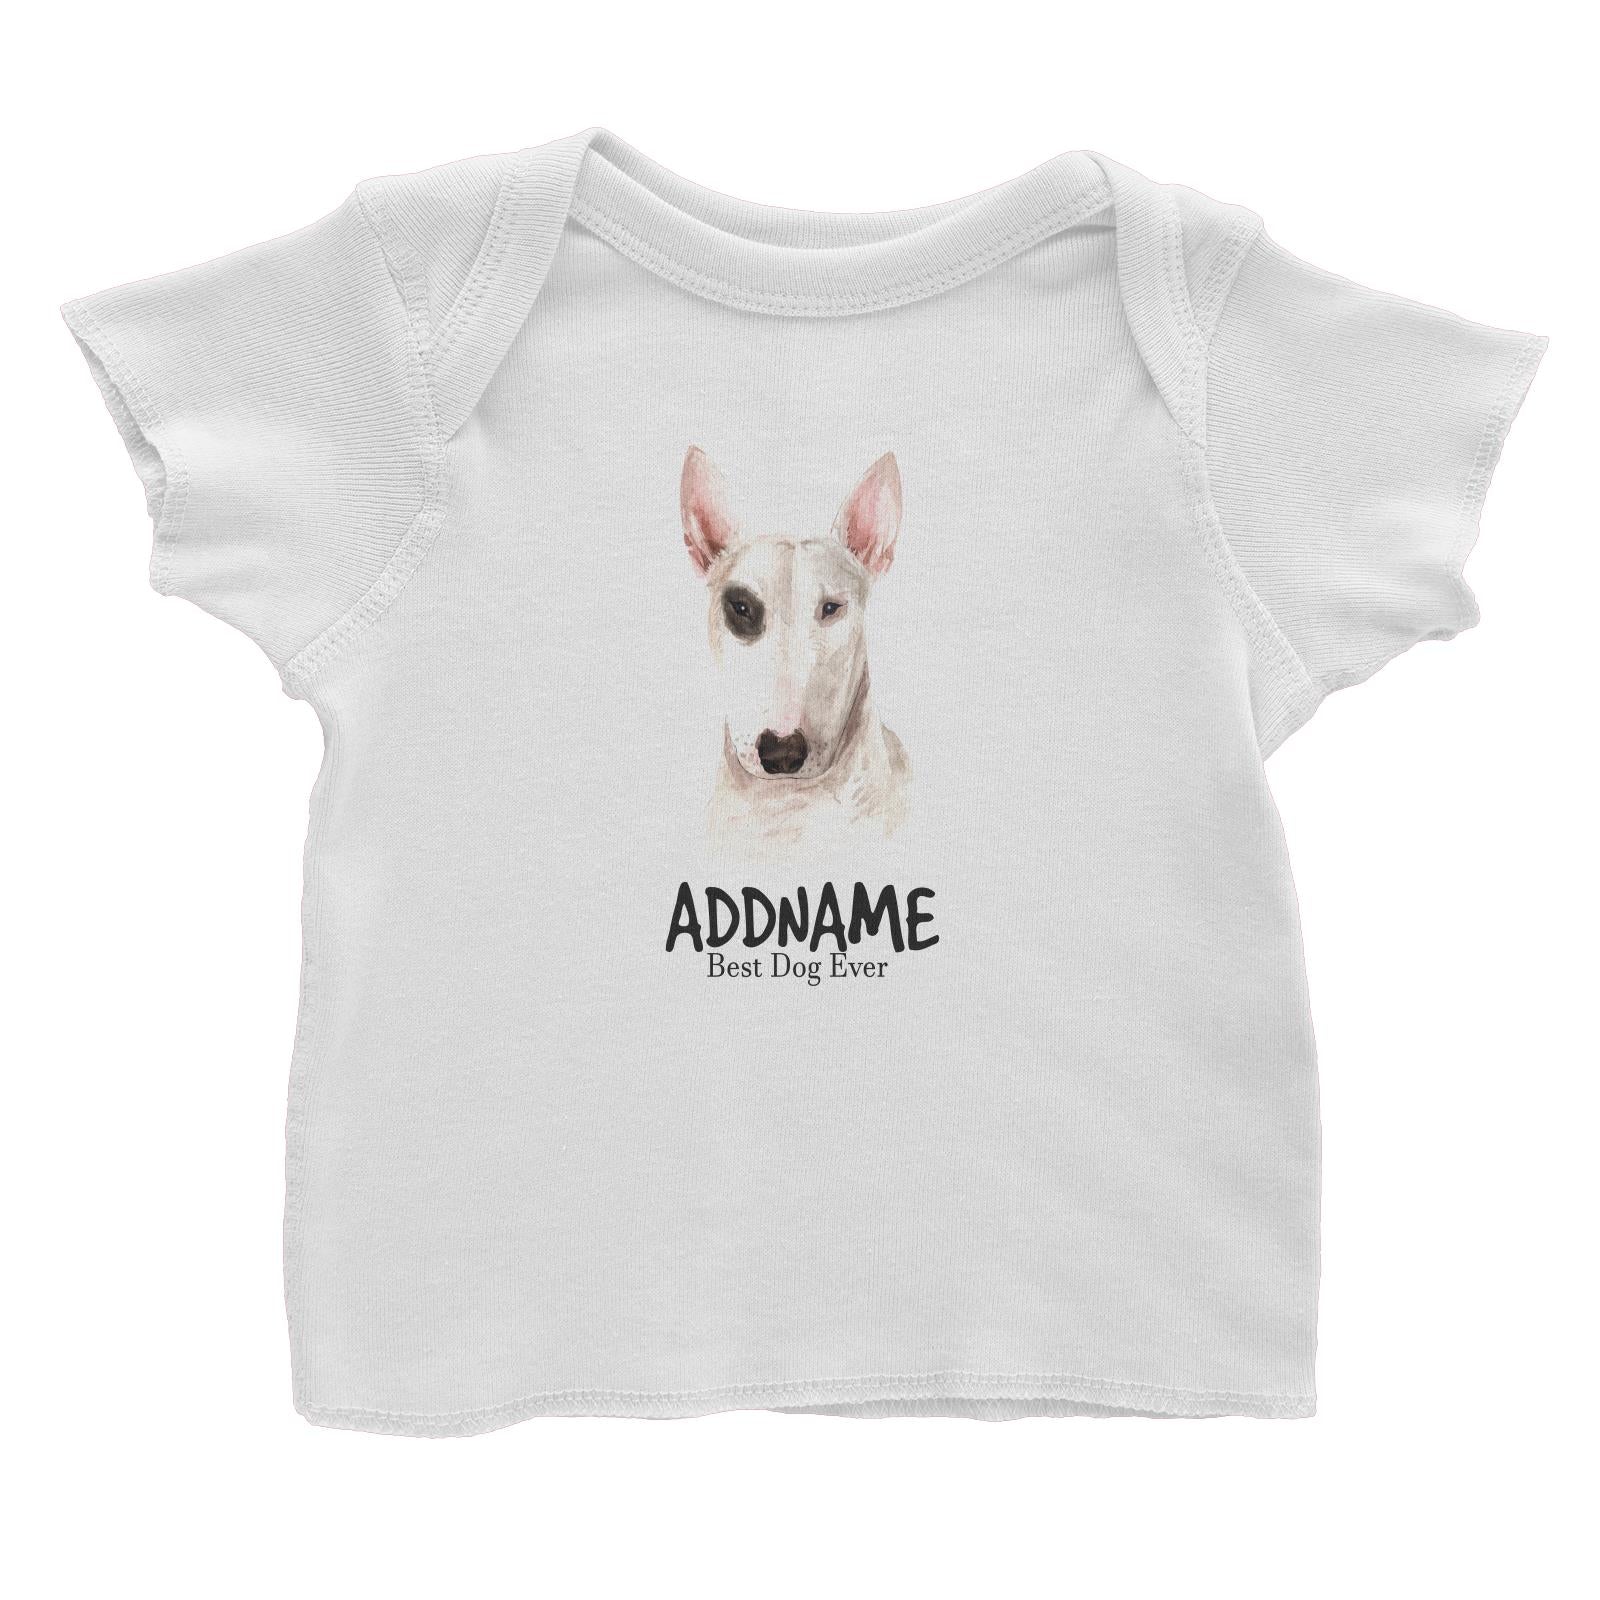 Watercolor Dog Bull Terrier Best Dog Ever Addname Baby T-Shirt